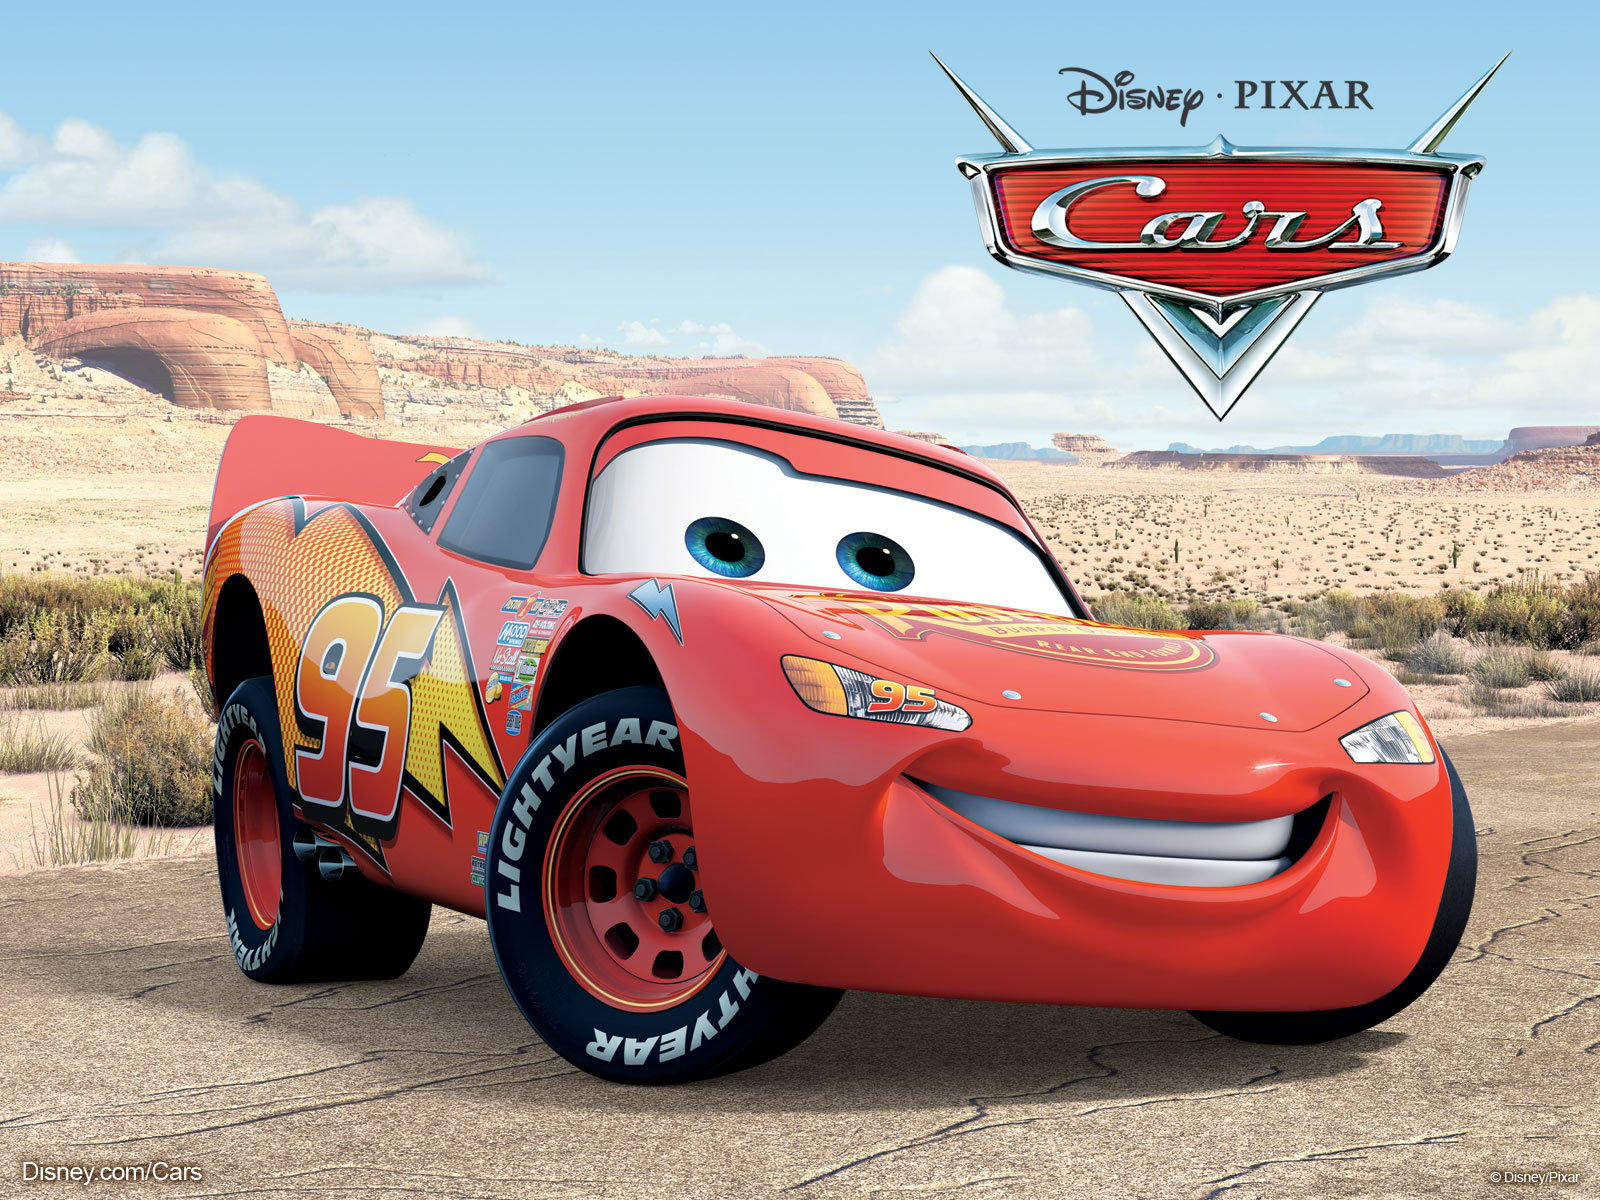  McQueen the red race car from the DisneyPixar move Cars wallpaper 1600x1200